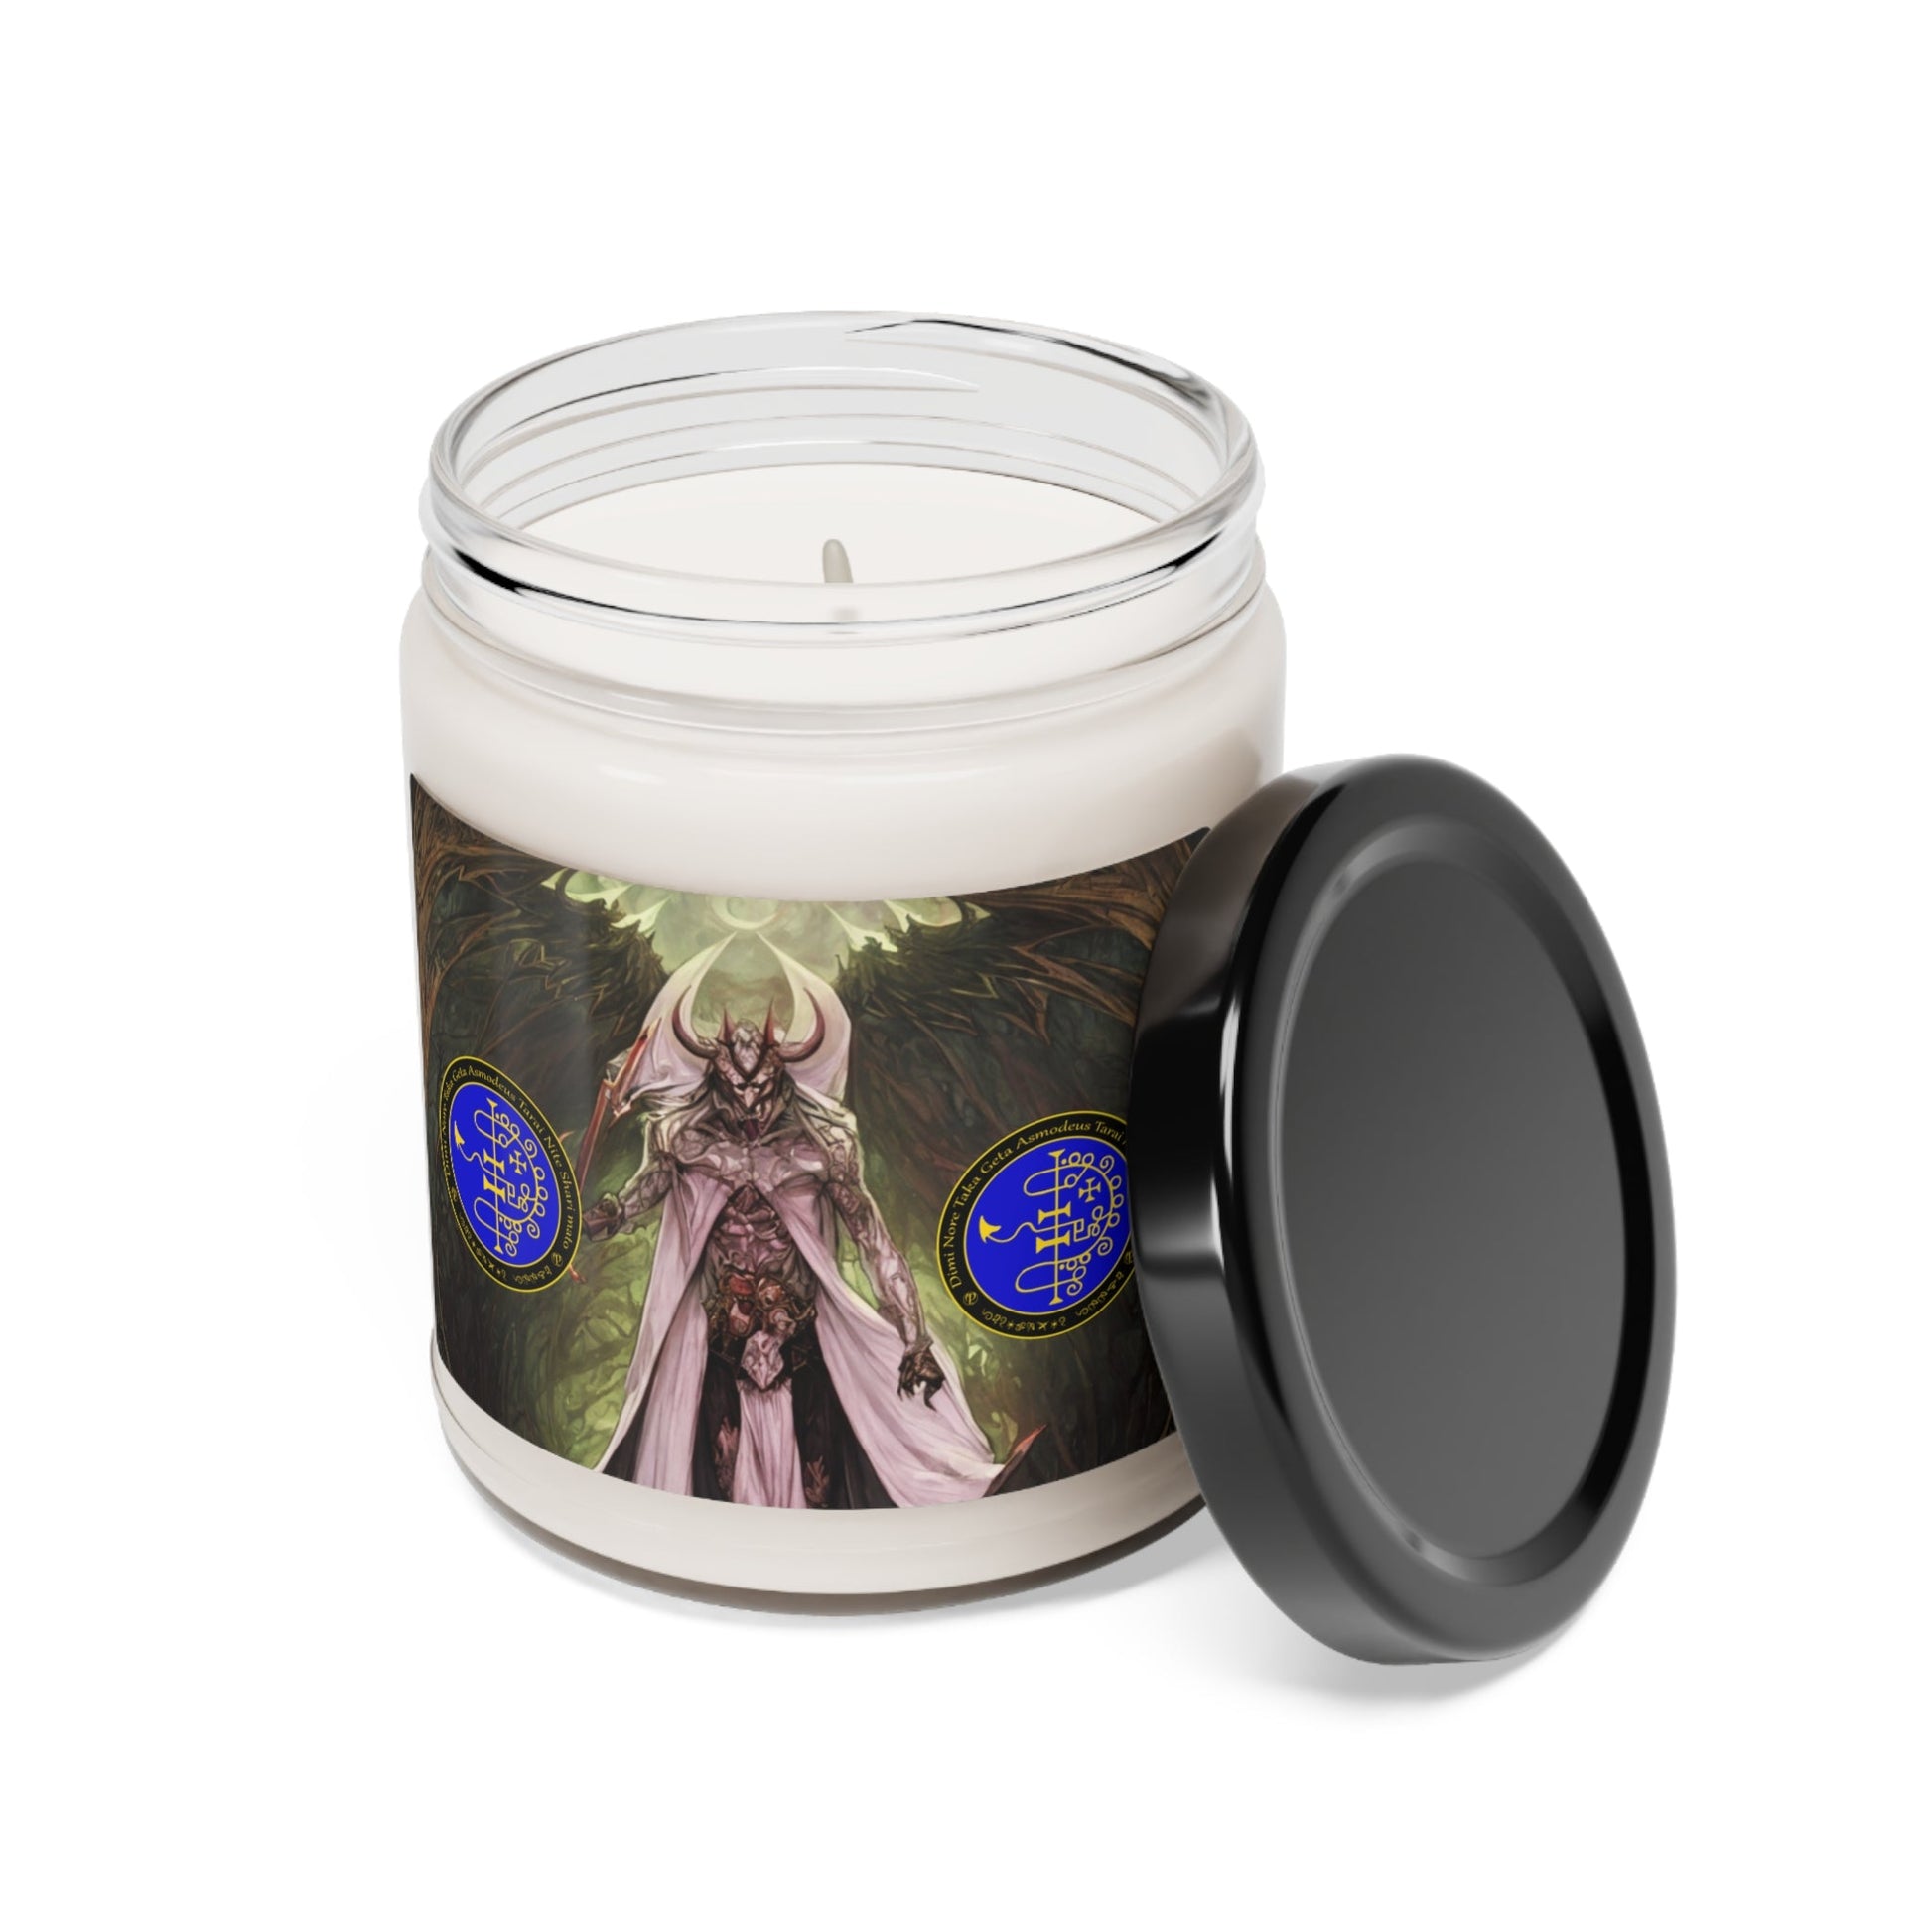 Demon-Asmodeus-Altar-Scented-Soy-Candle-for-Gambling-related-offerings-rituals-initiations-or-praying-and-meditation-12